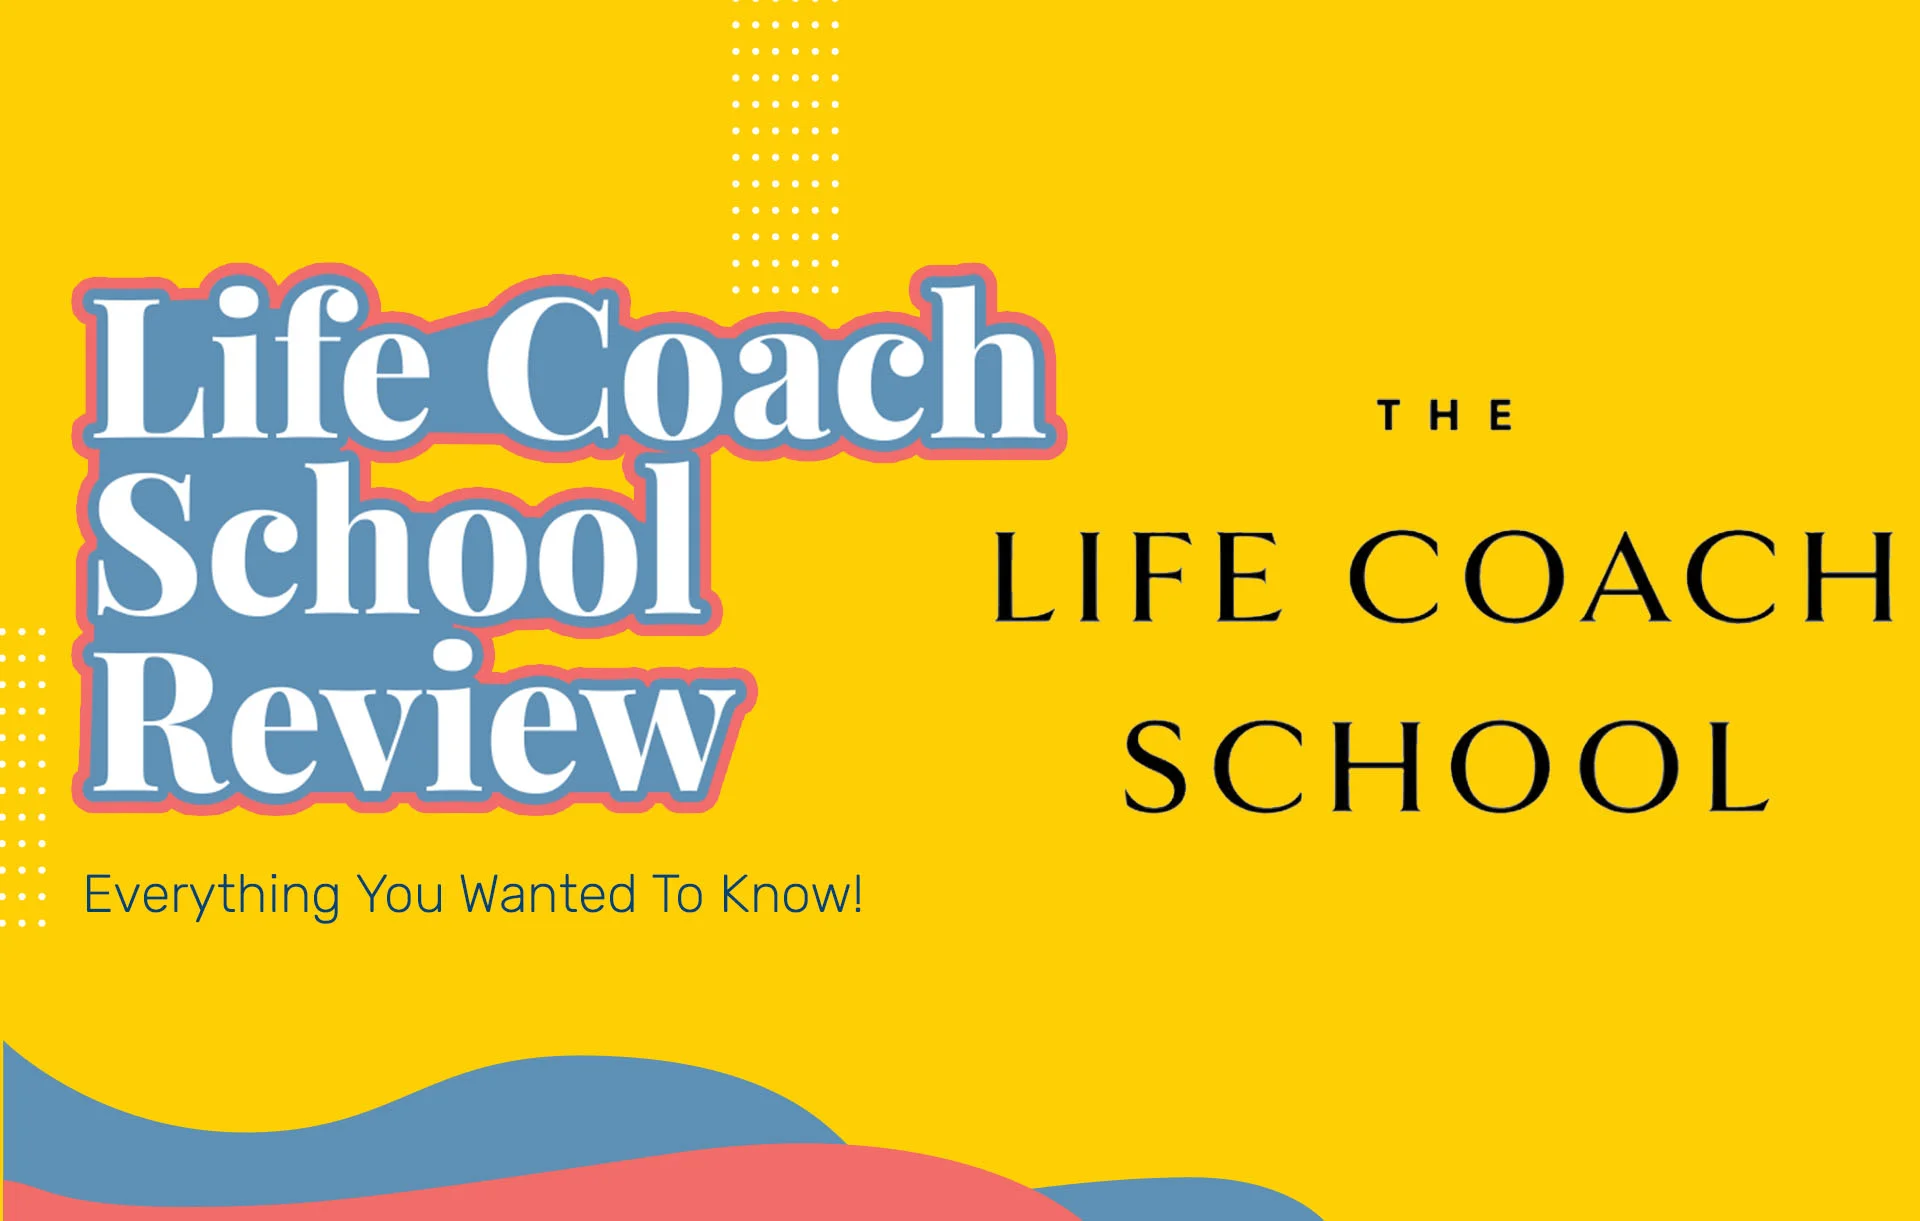 The Life Coach School Review